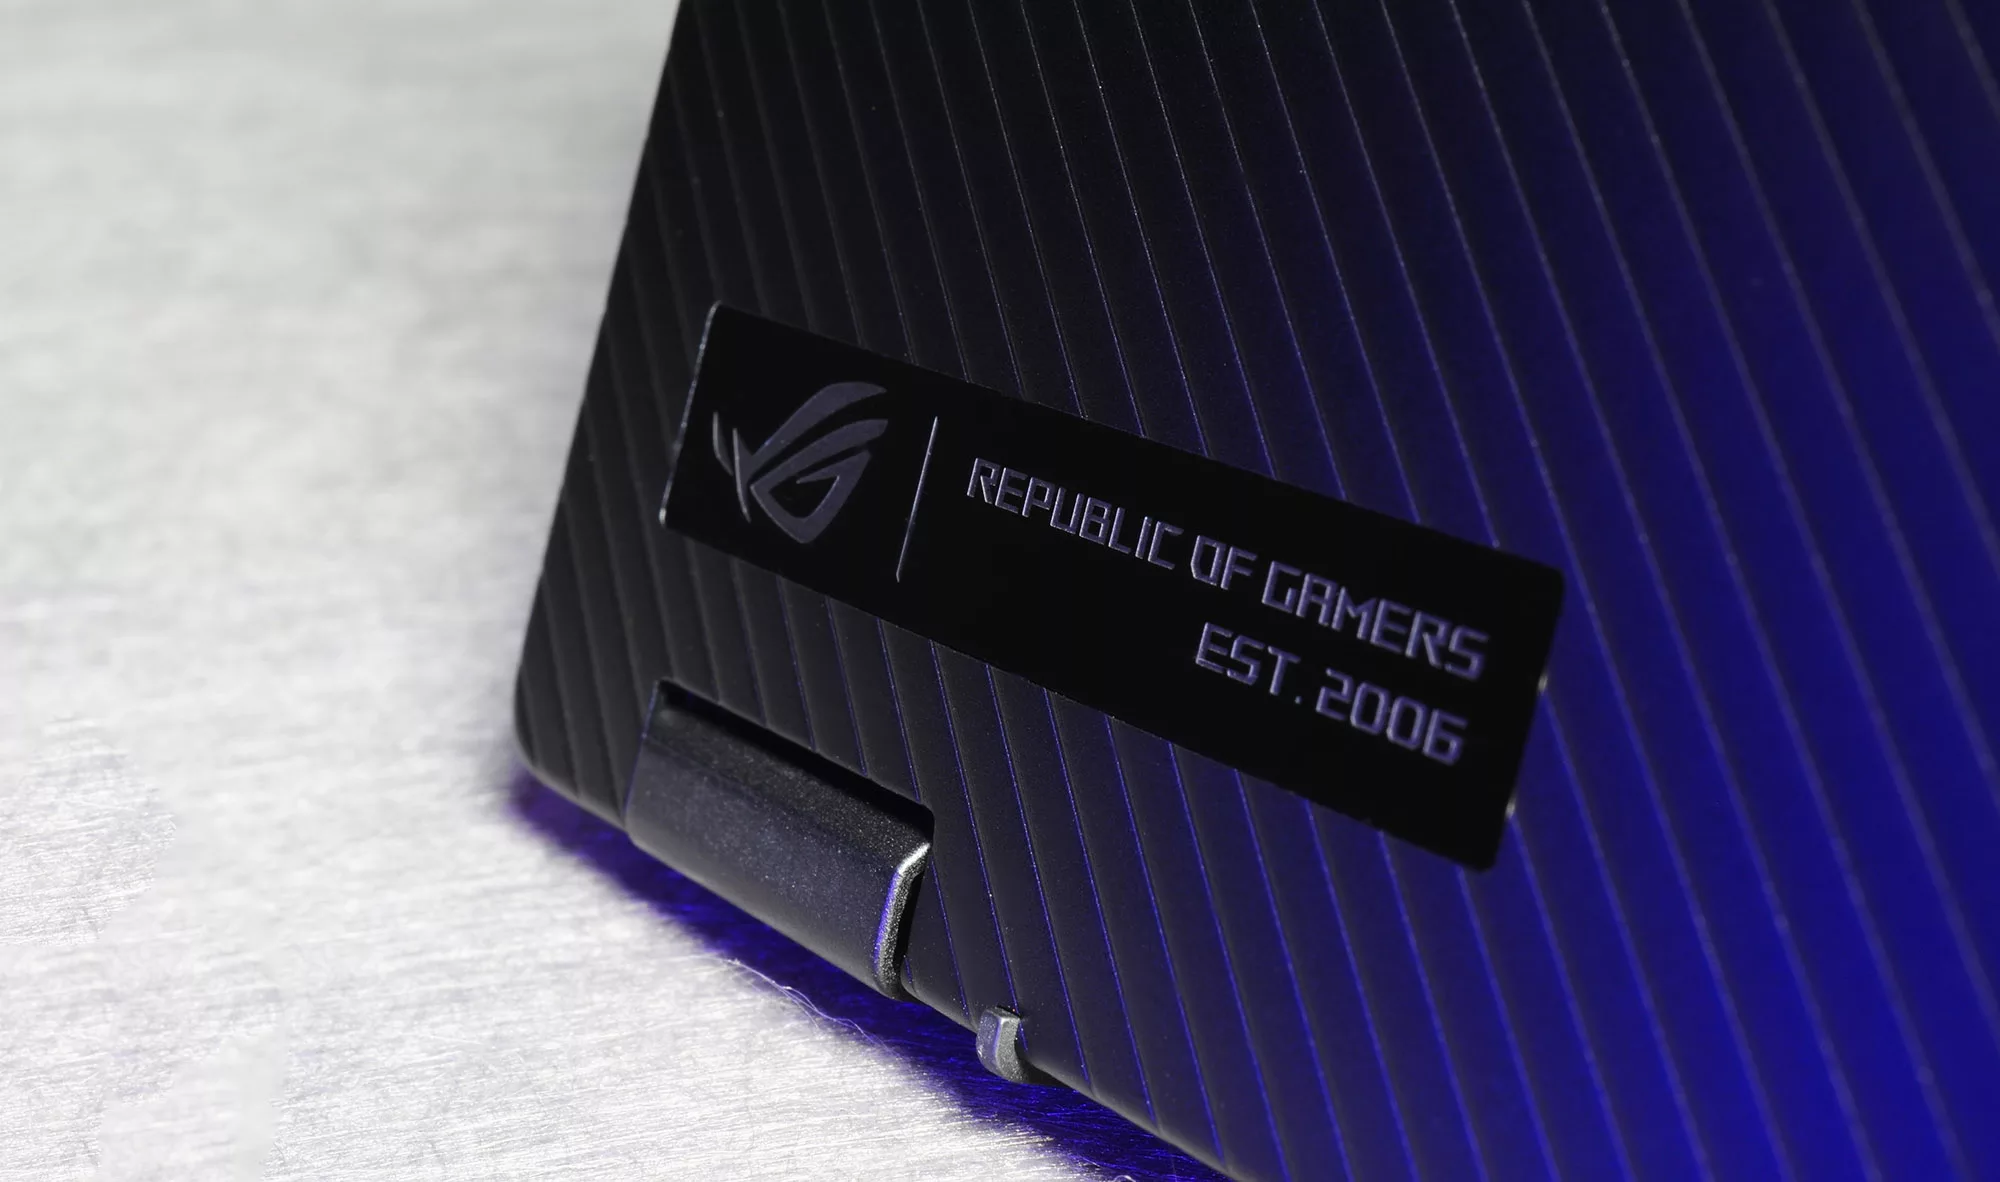 Closeup shot of the ROG logo on the Flow X13.